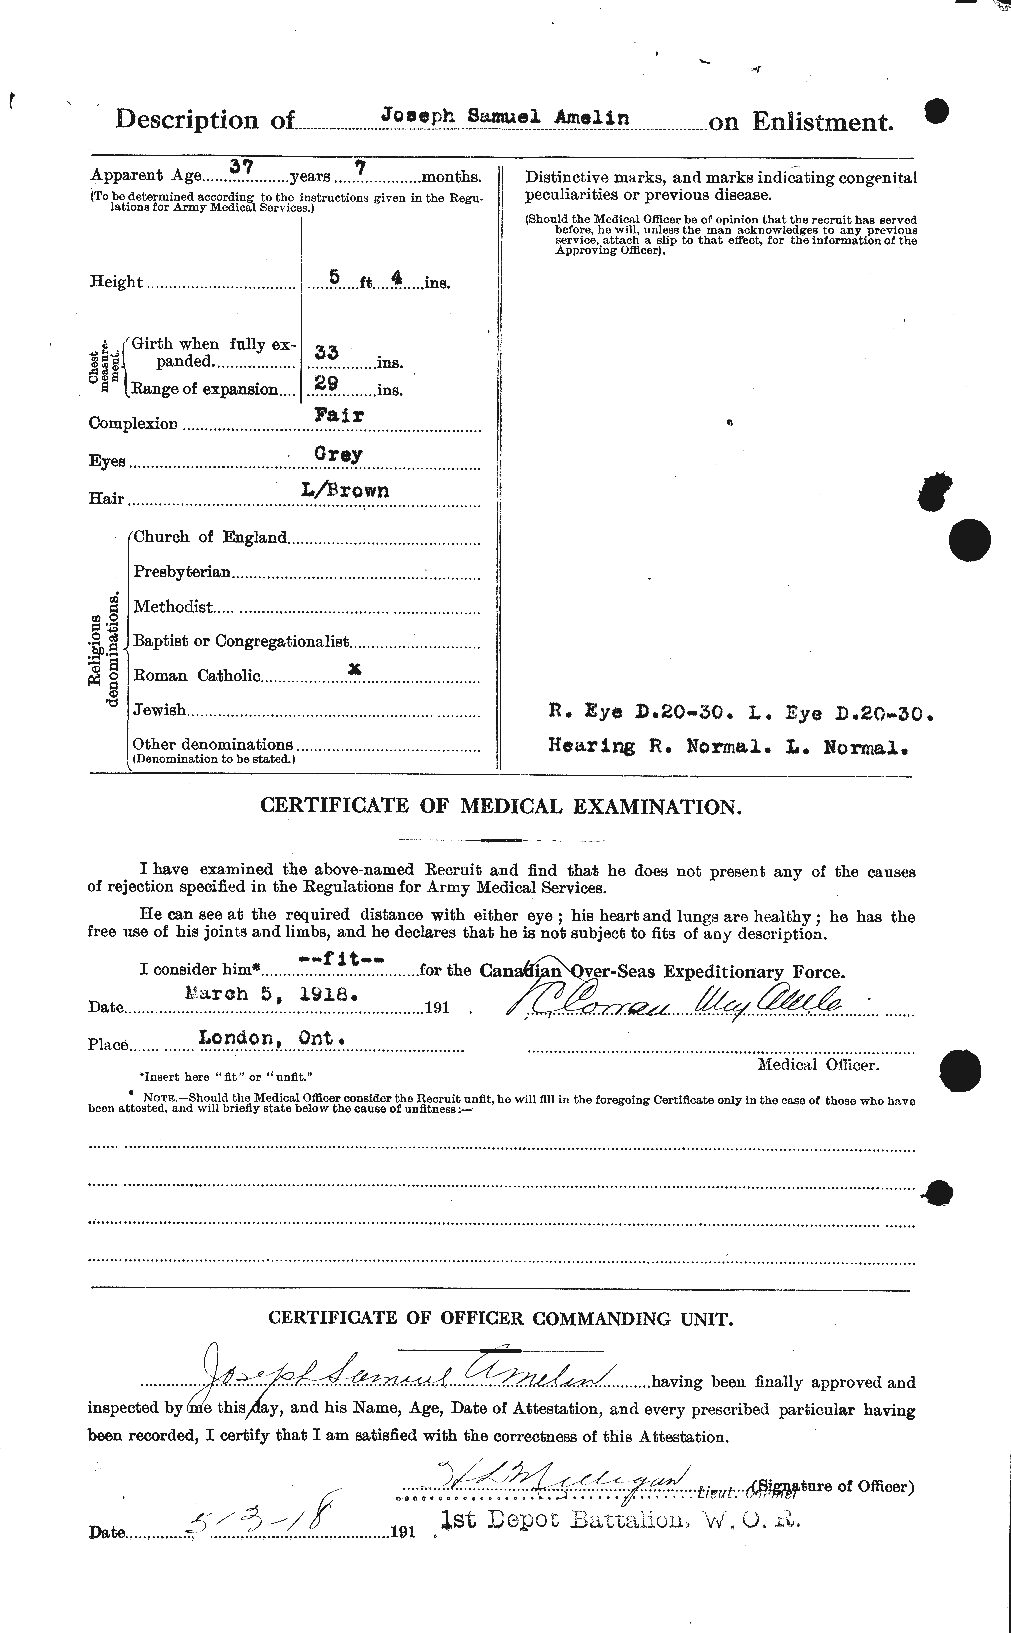 Personnel Records of the First World War - CEF 208906b